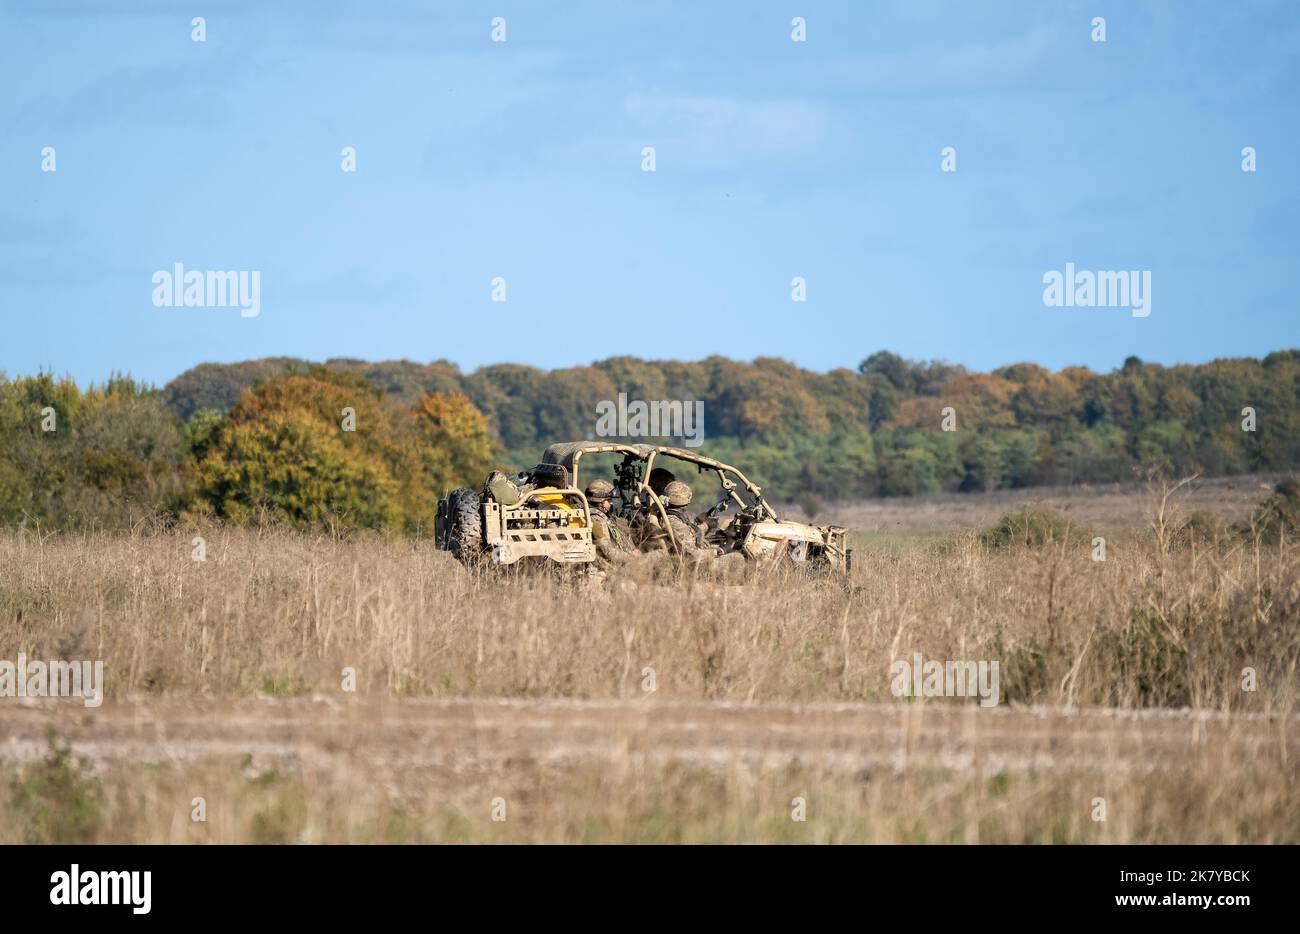 Polaris MRZR-D4 UTV (utility task vehicle) carrying soldiers from 40 Commando Royal Marines on a military exercise, Wiltshire UK Stock Photo